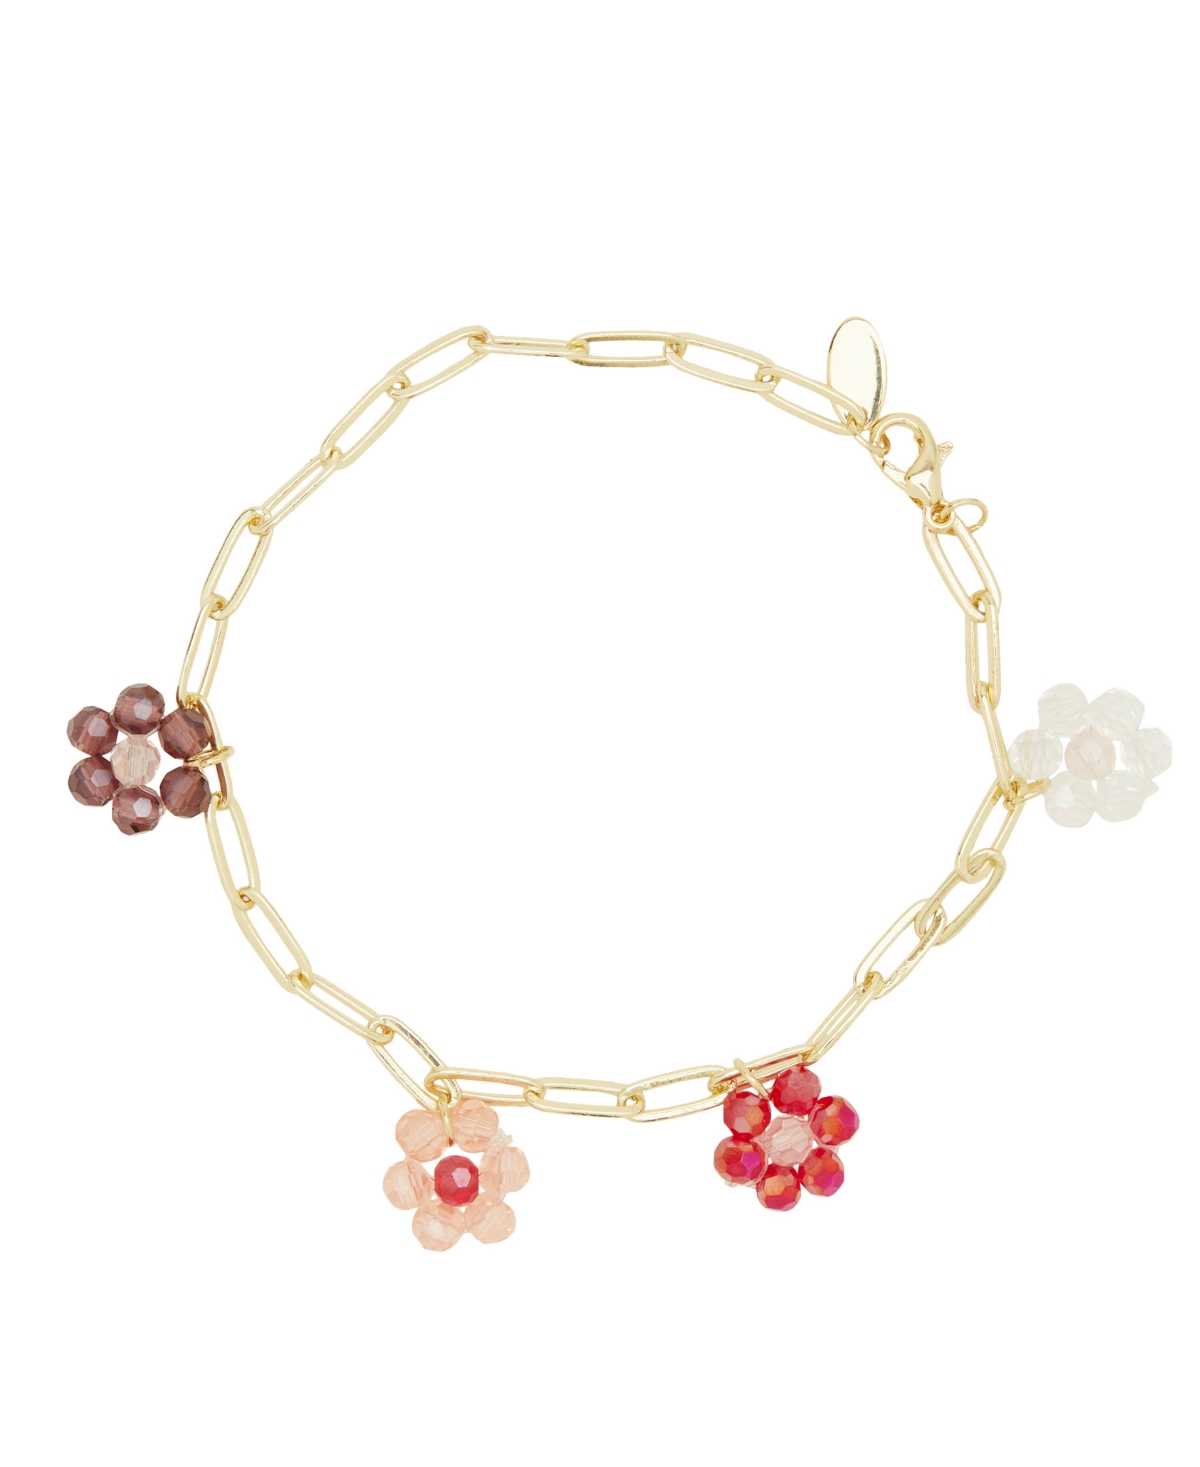 Dreamstate Dainty Link Chain with Beaded Flower Bracelet